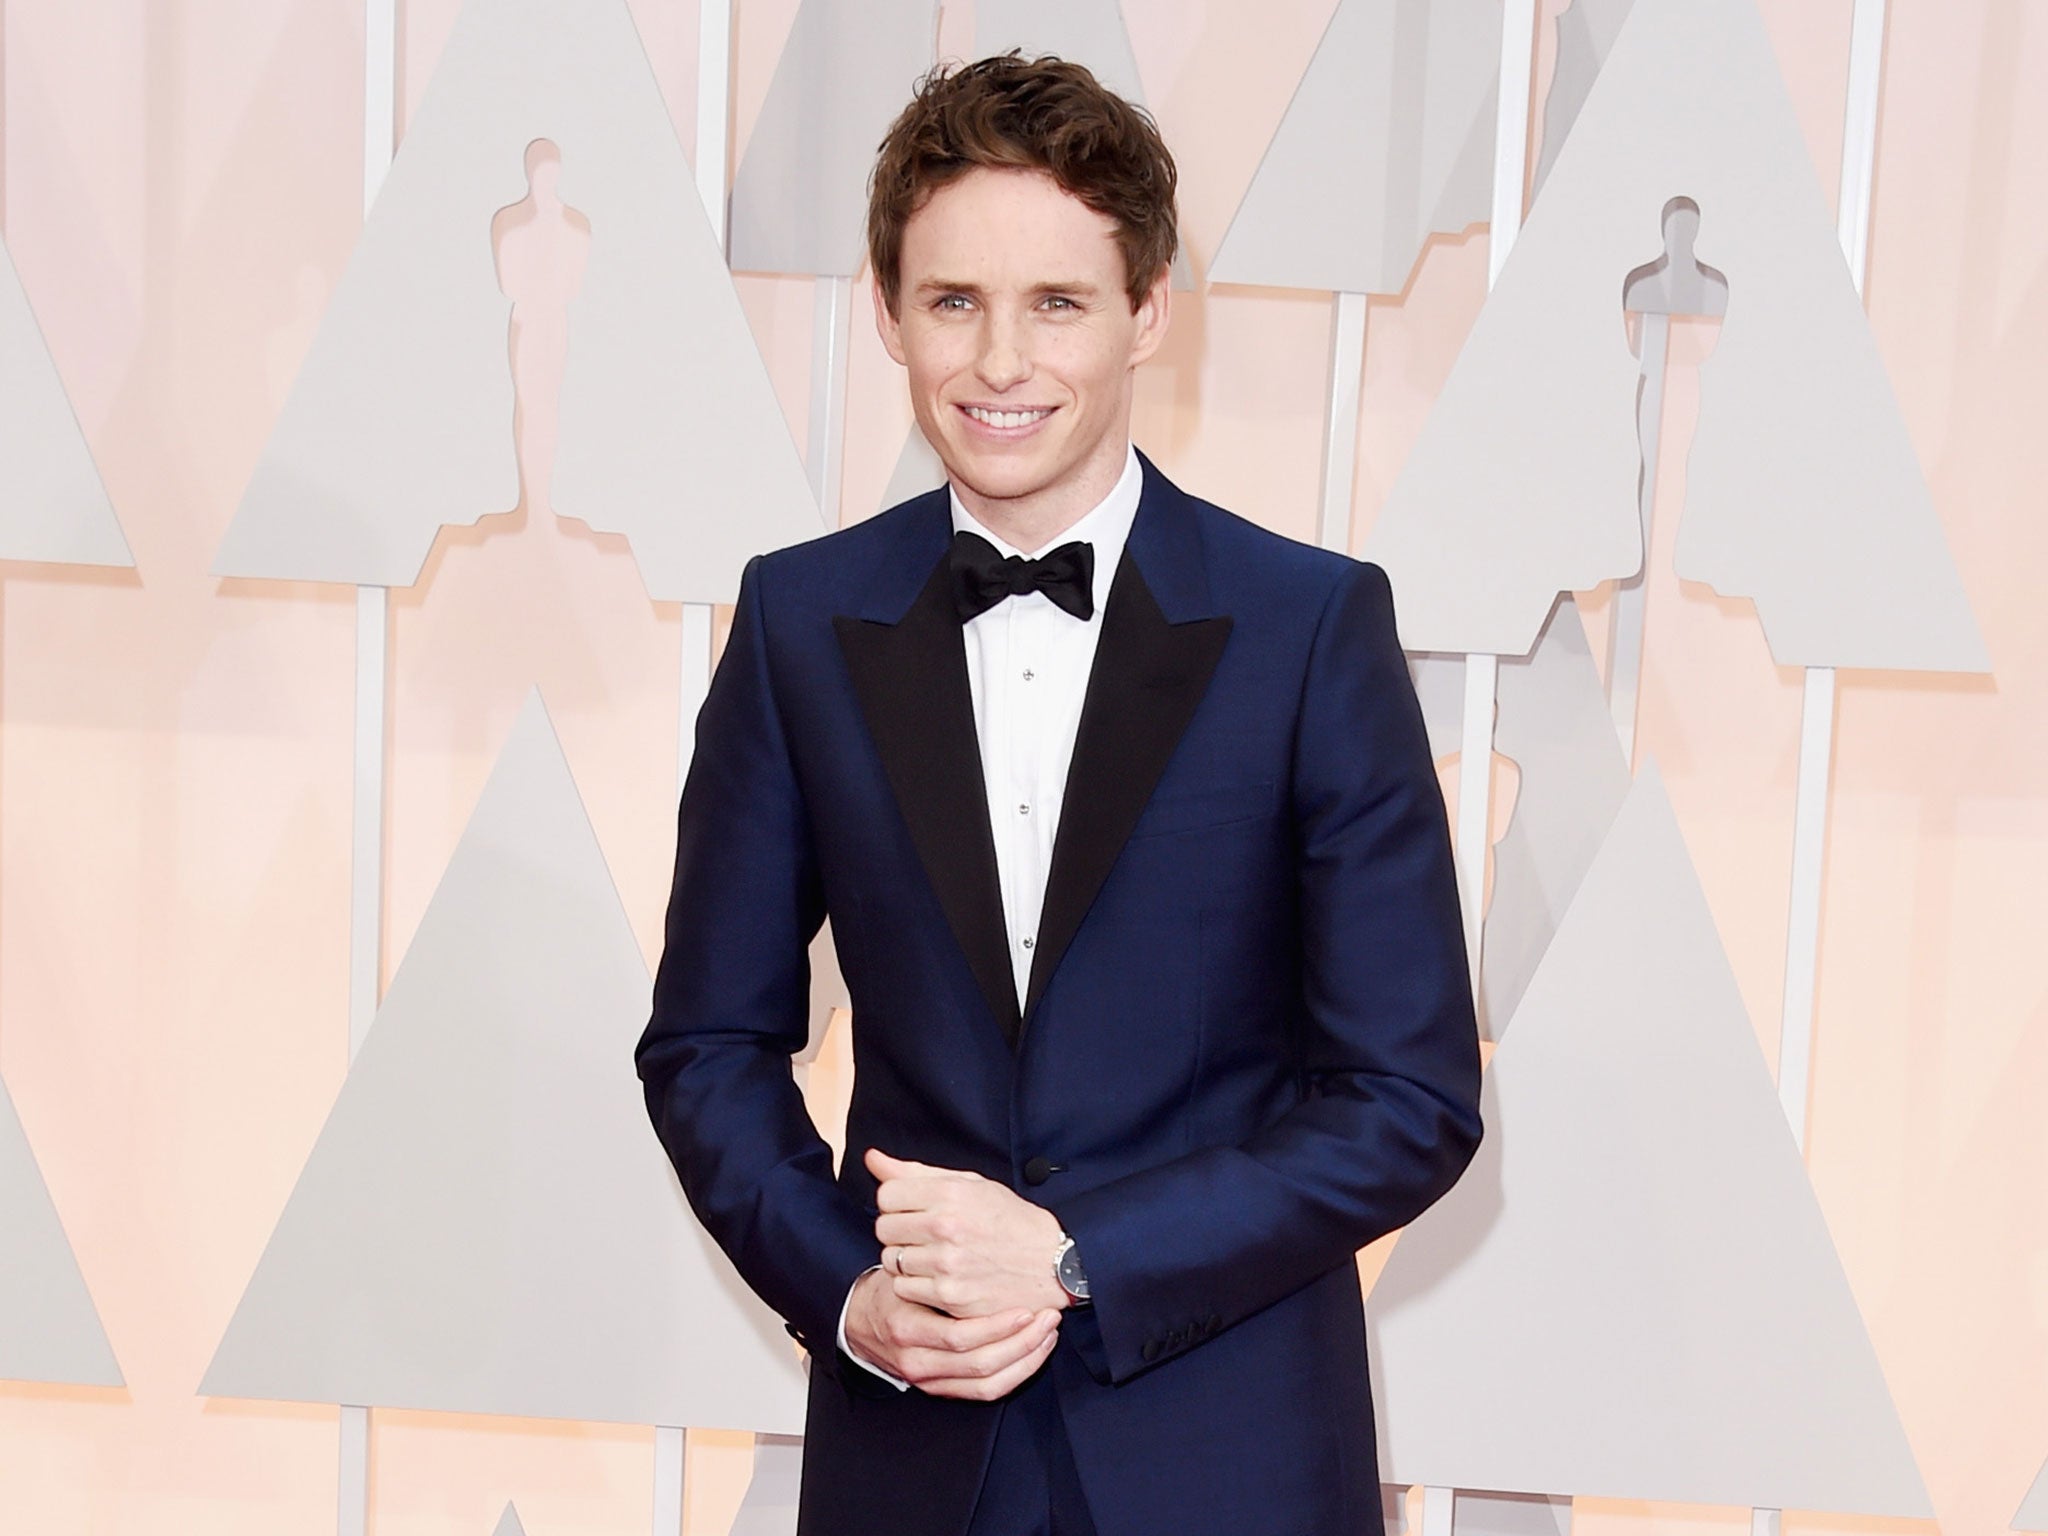 Eddie Redmayne has been cast as Newt Scamander in Fantastic Beasts and Where to Find Them